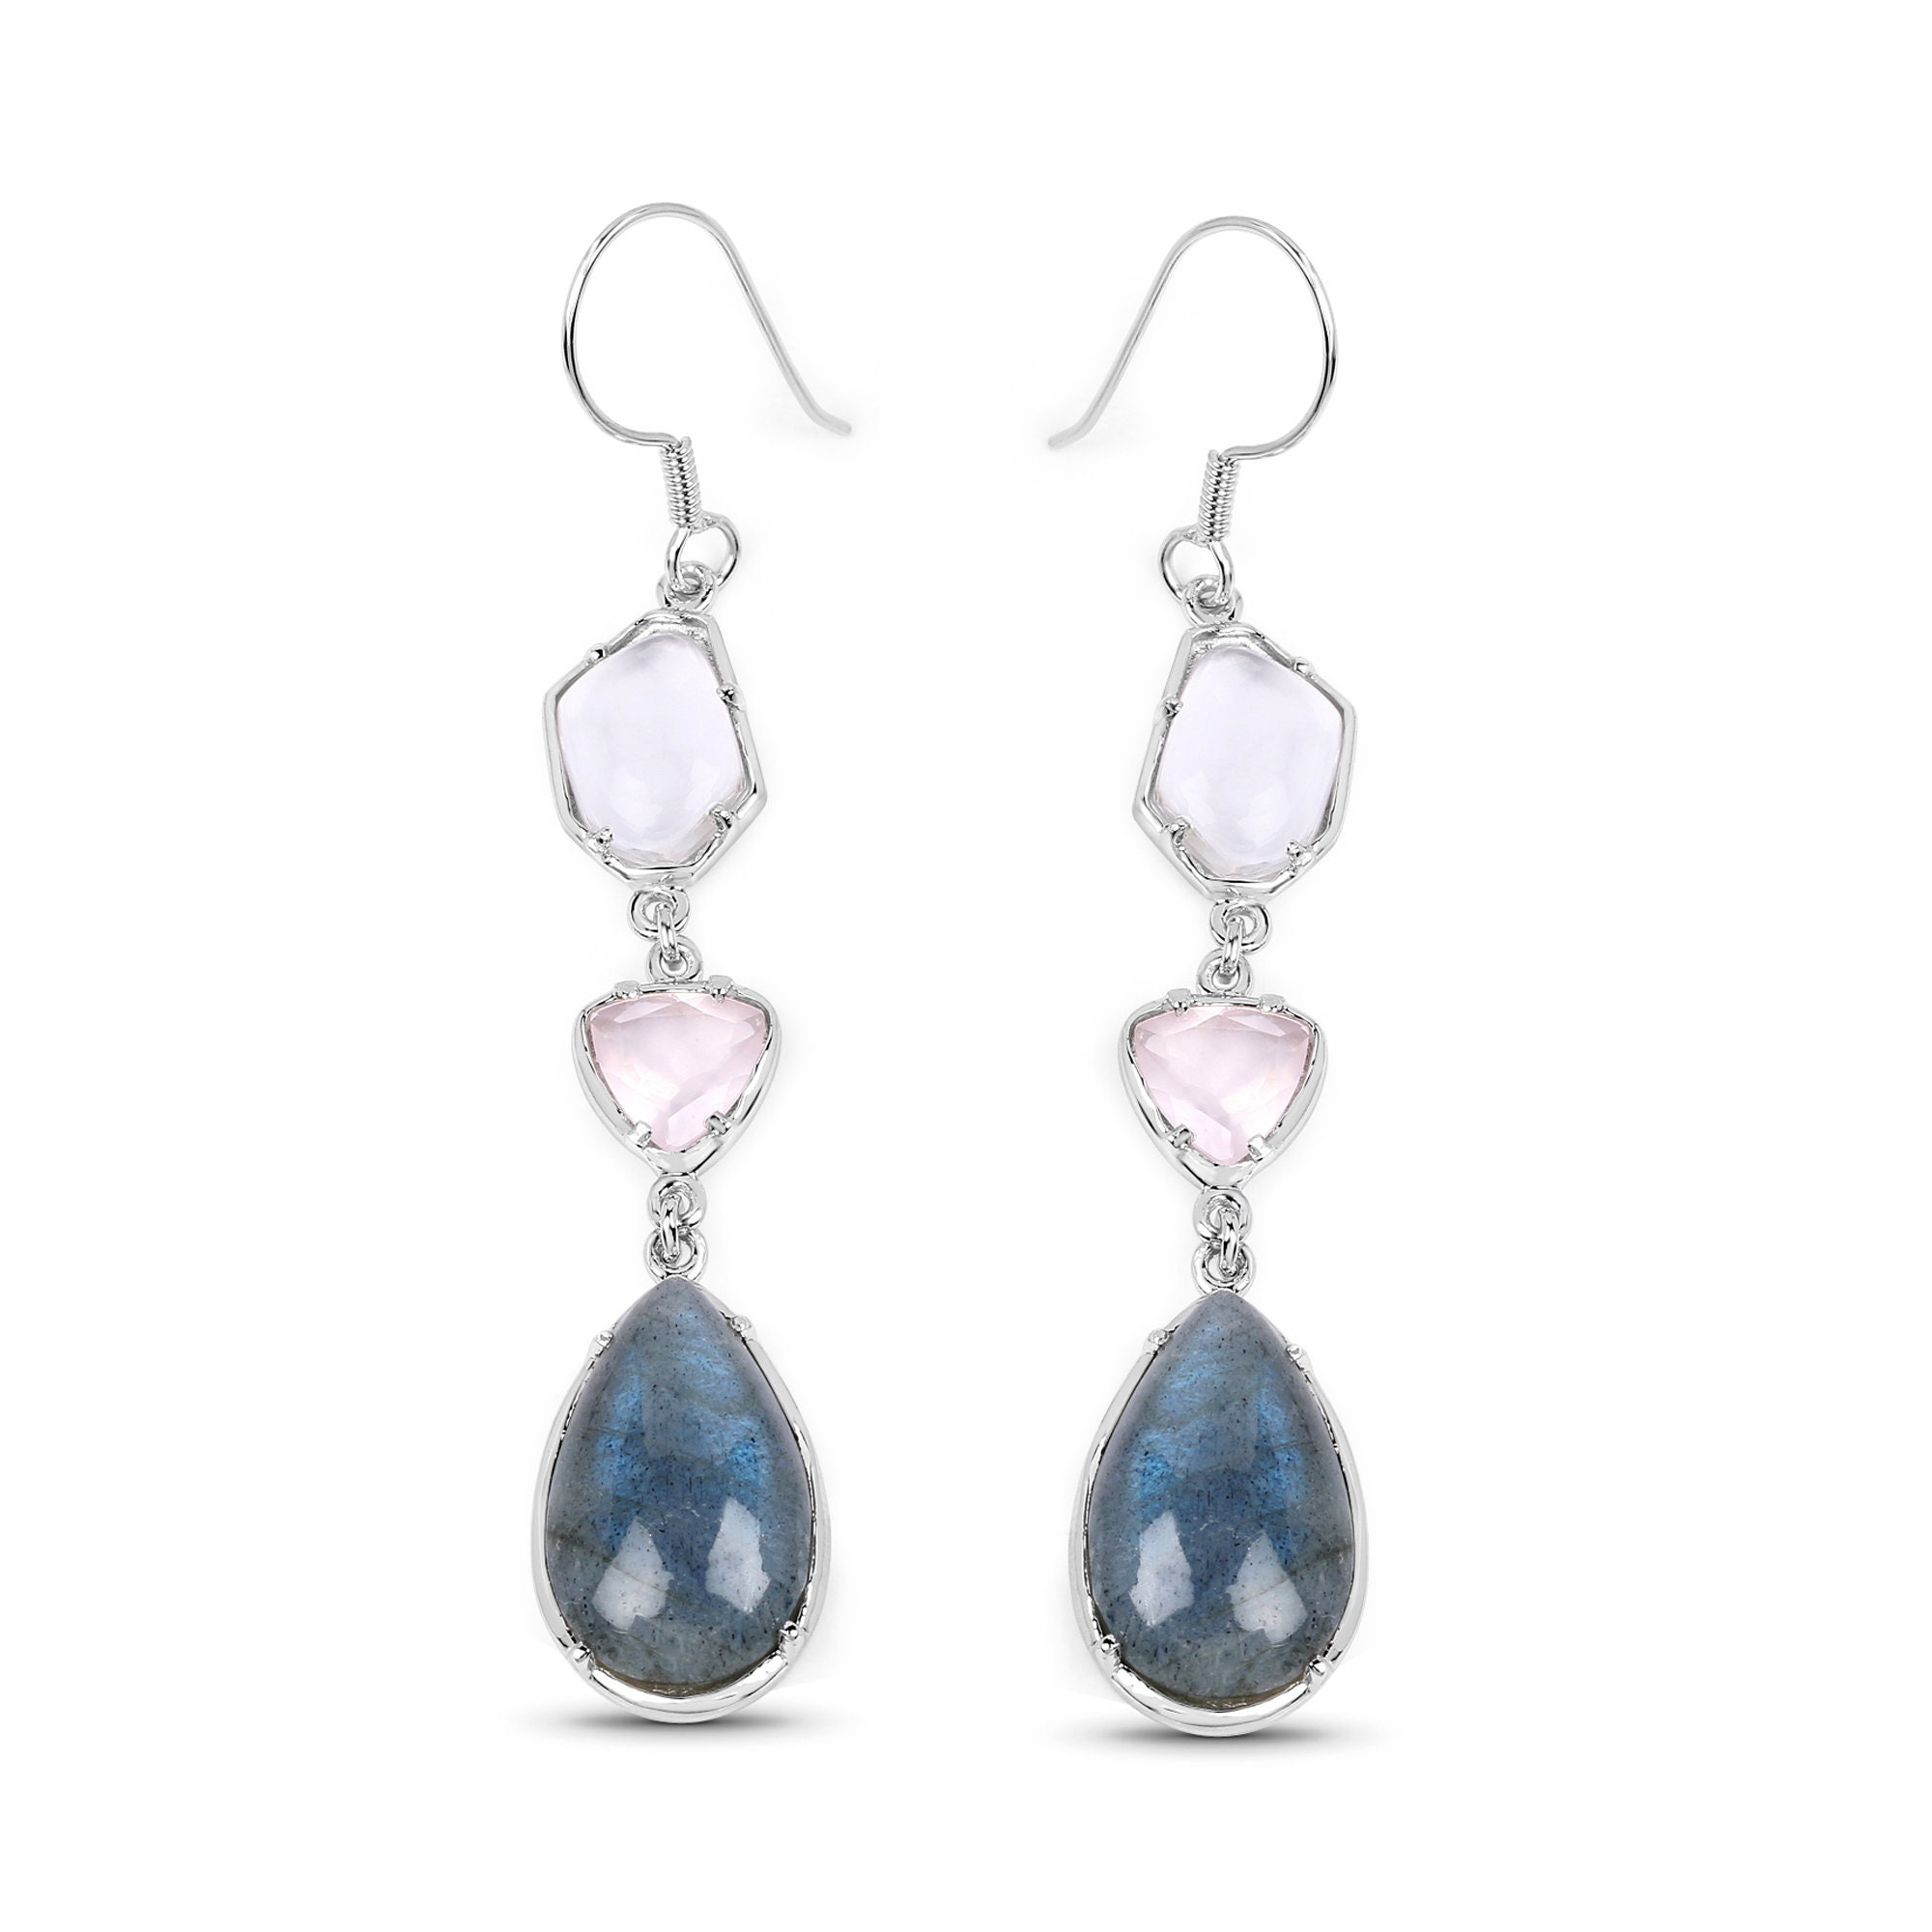 Natural Labradorite, Crystal Quartz & Rose Dangling Earrings in .925 Sterling Silver, Gift For Sweet 16, Bridesmaid Gifts